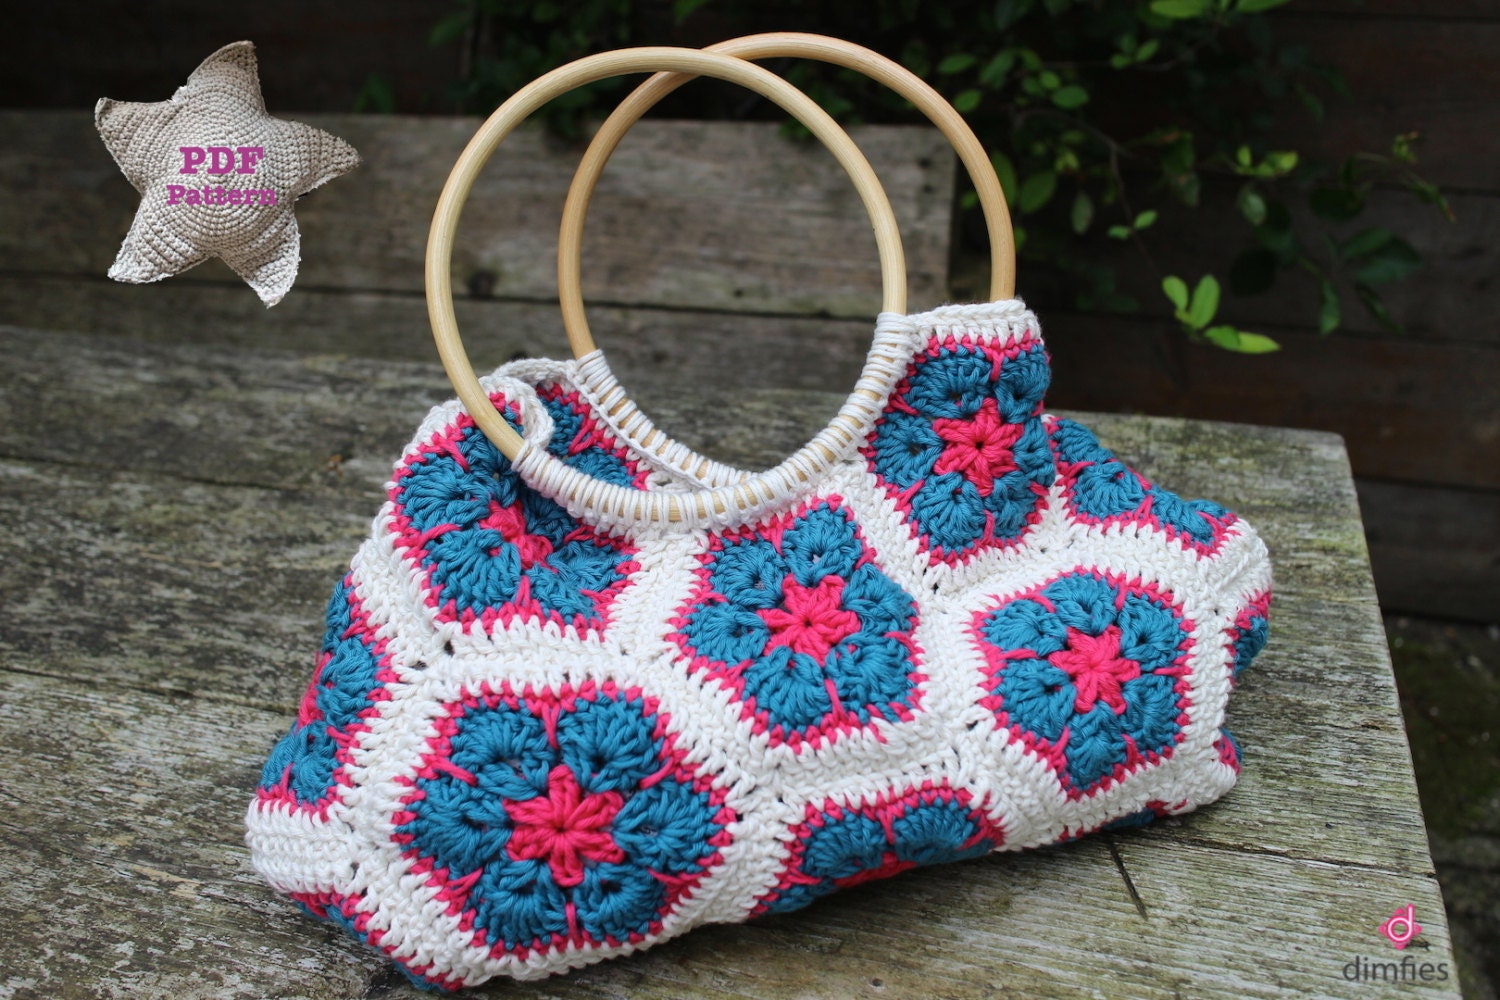 10 Tried and True Crochet Bag Patterns - Cre8tion Crochet